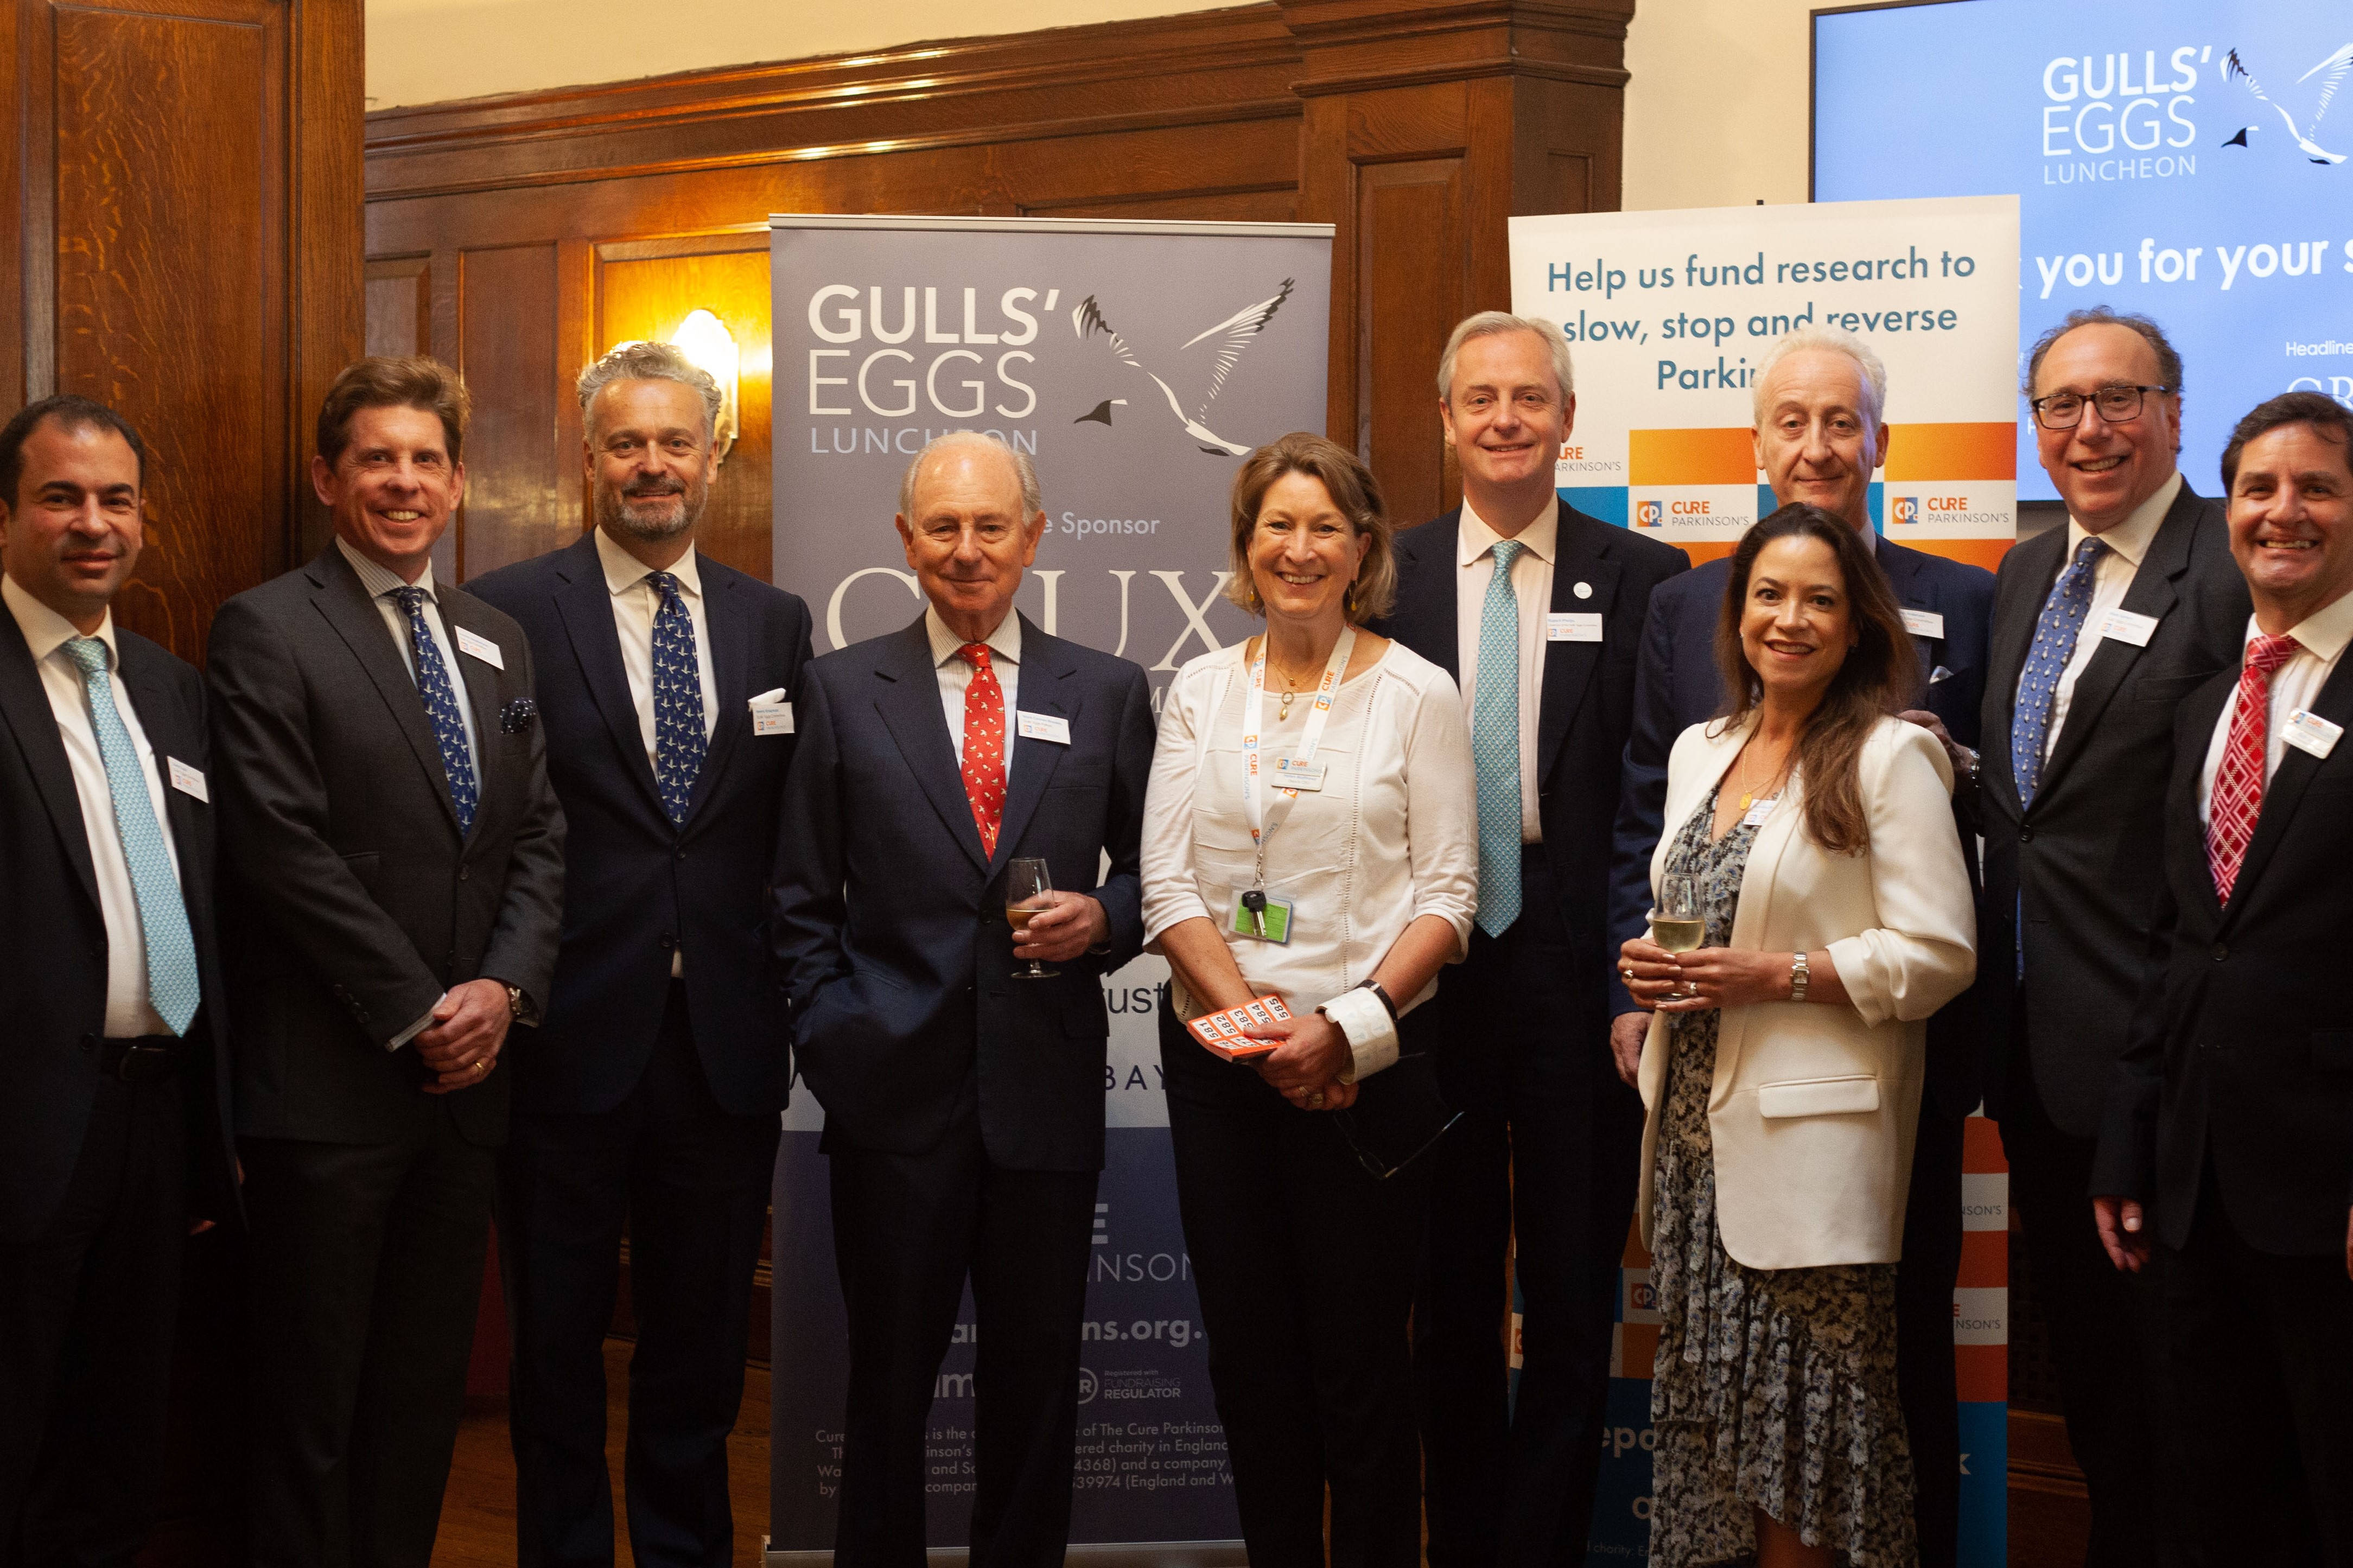 34th annual Gulls’ Eggs Luncheon raises over £90,000 for Parkinson’s research